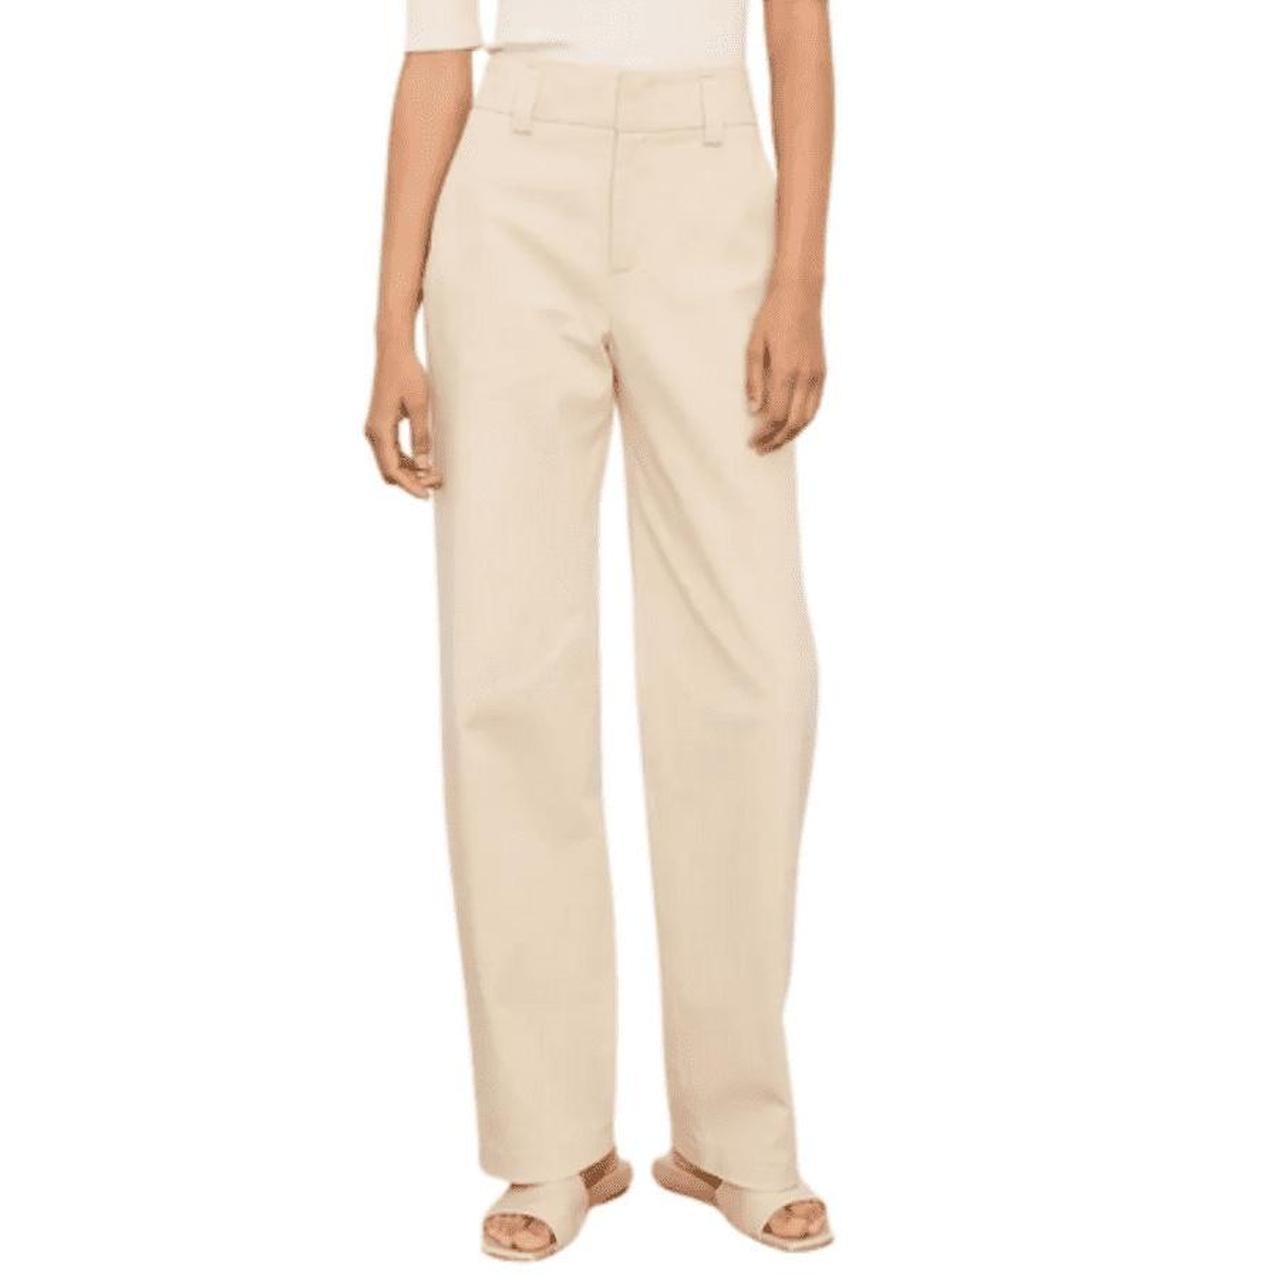 Vince Women's Cream and Tan Trousers